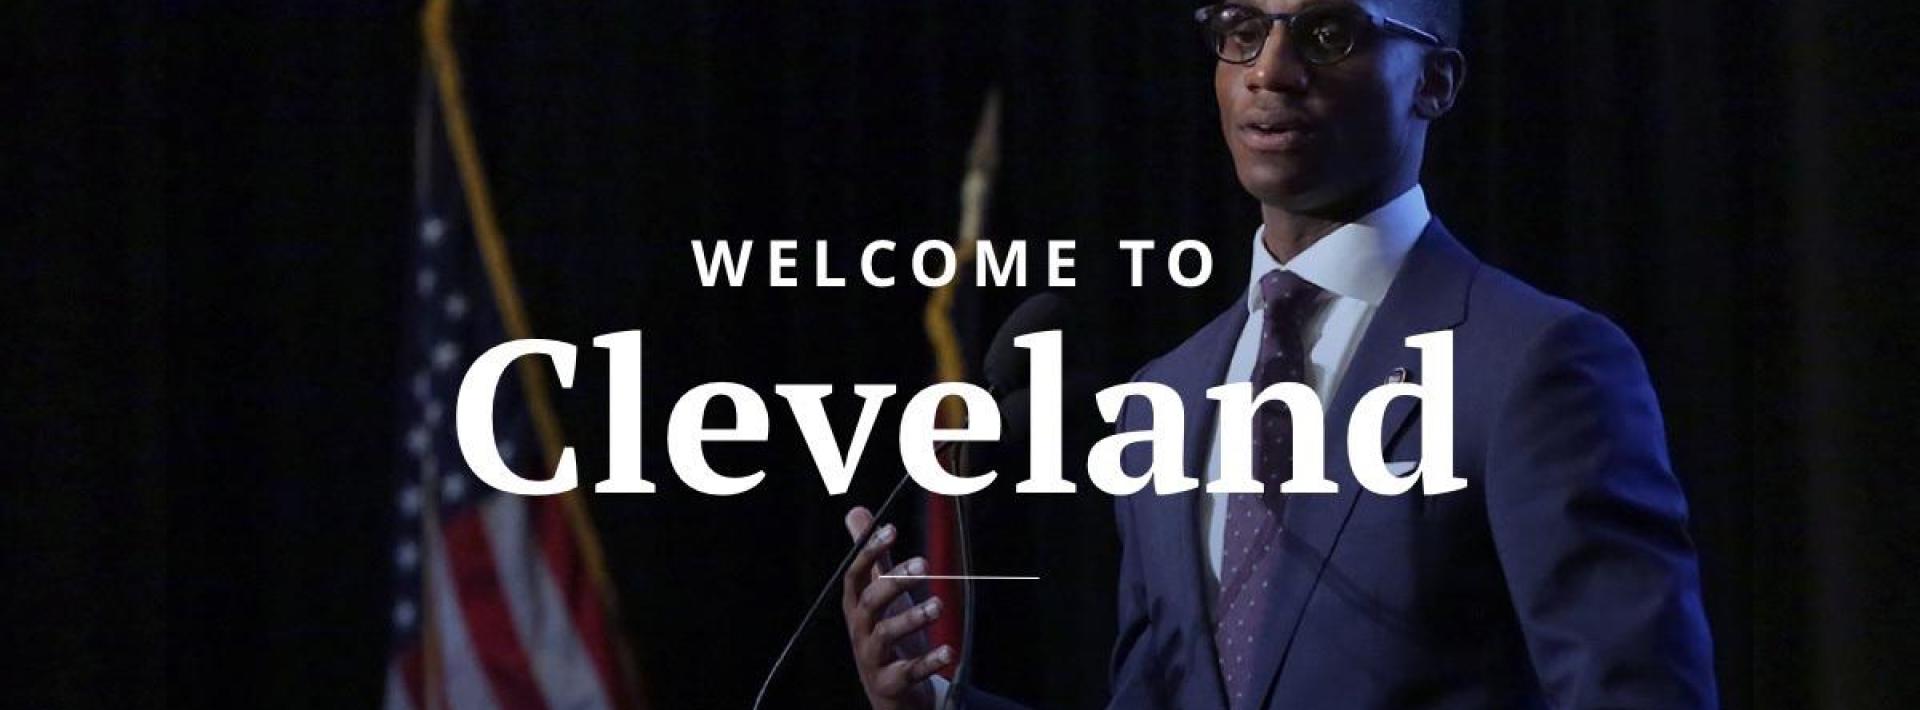 mayor bibb with words 'city of cleveland' over image